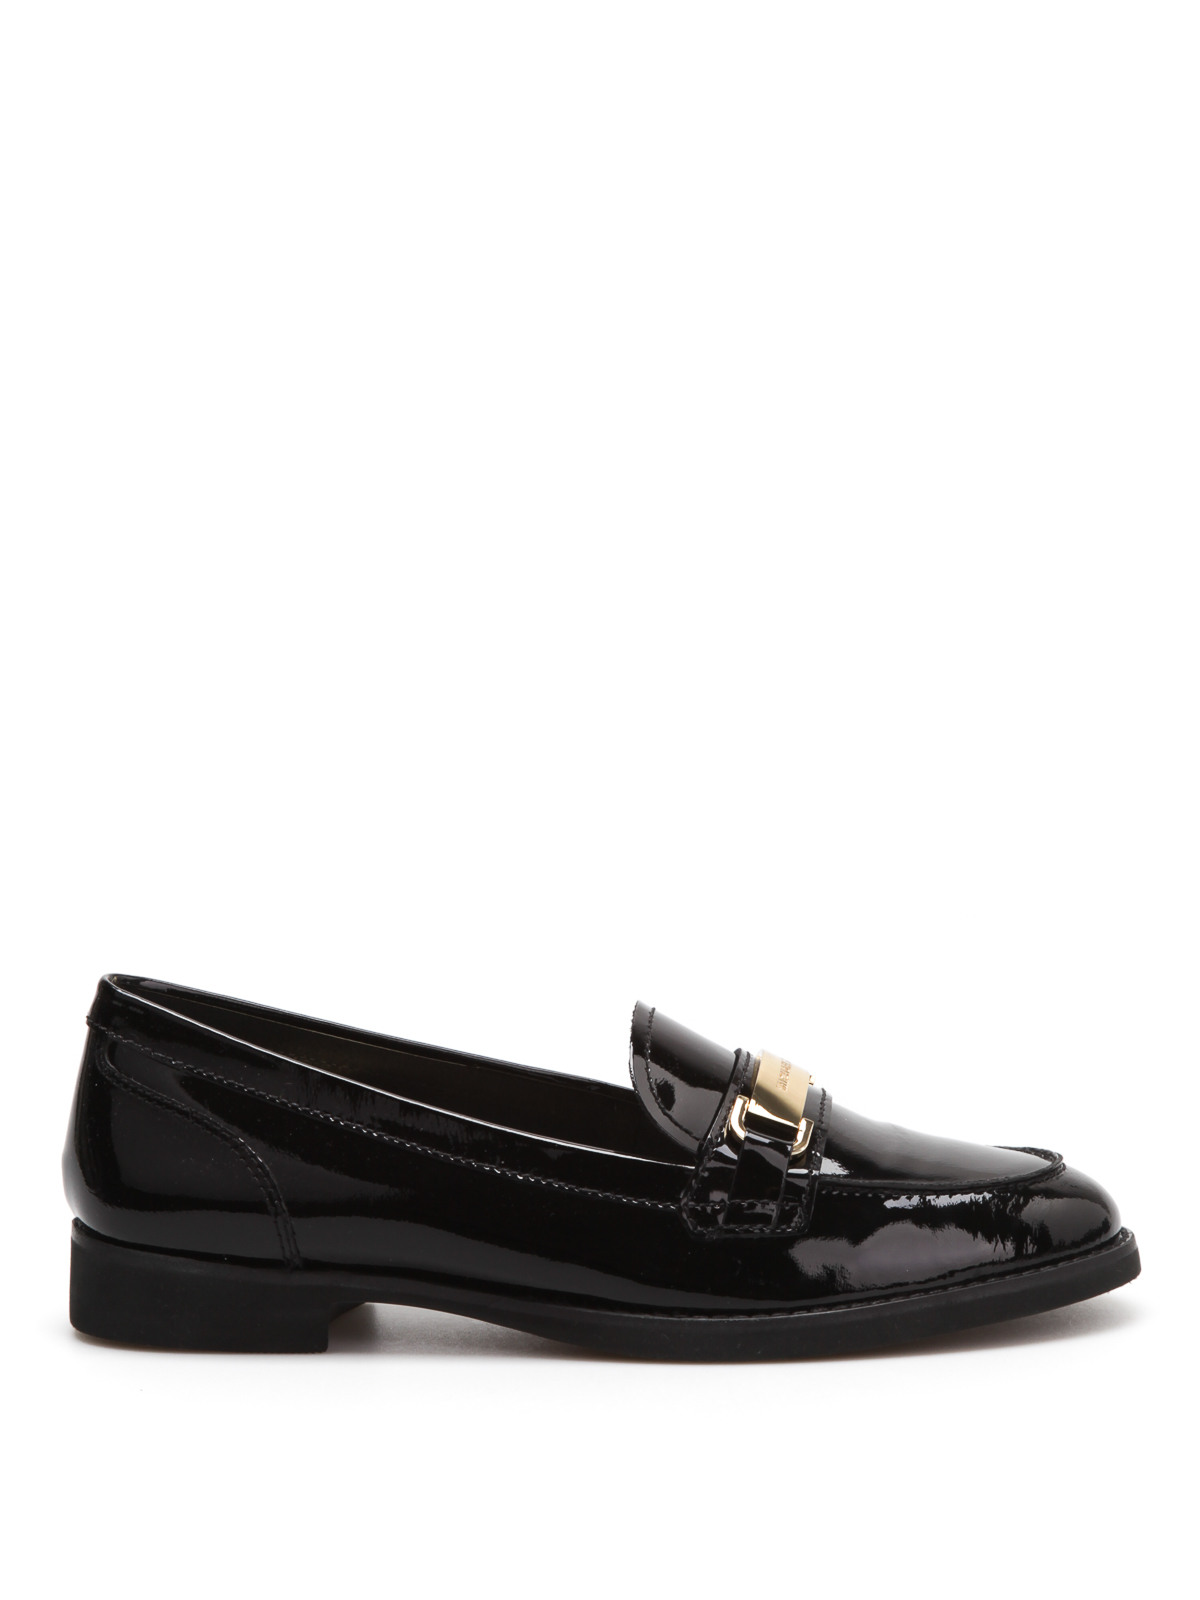 Loafers & Slippers Michael Kors - Patent leather loafer - 40T5ANFR1A